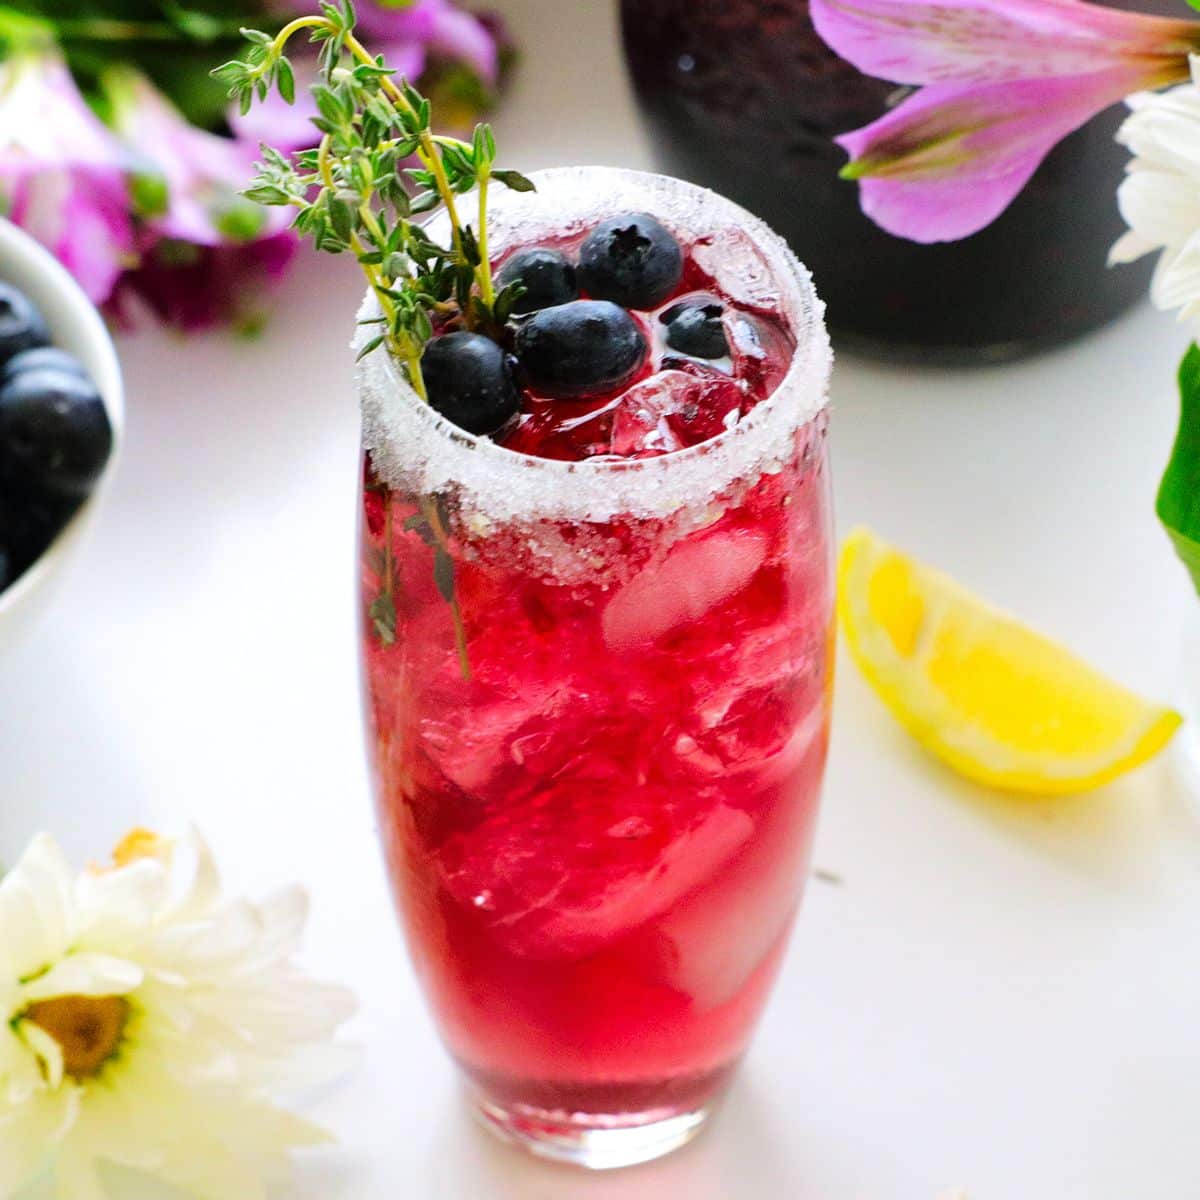 Blueberry Cocktail (Easy To Make Ahead!) - The Anthony Kitchen